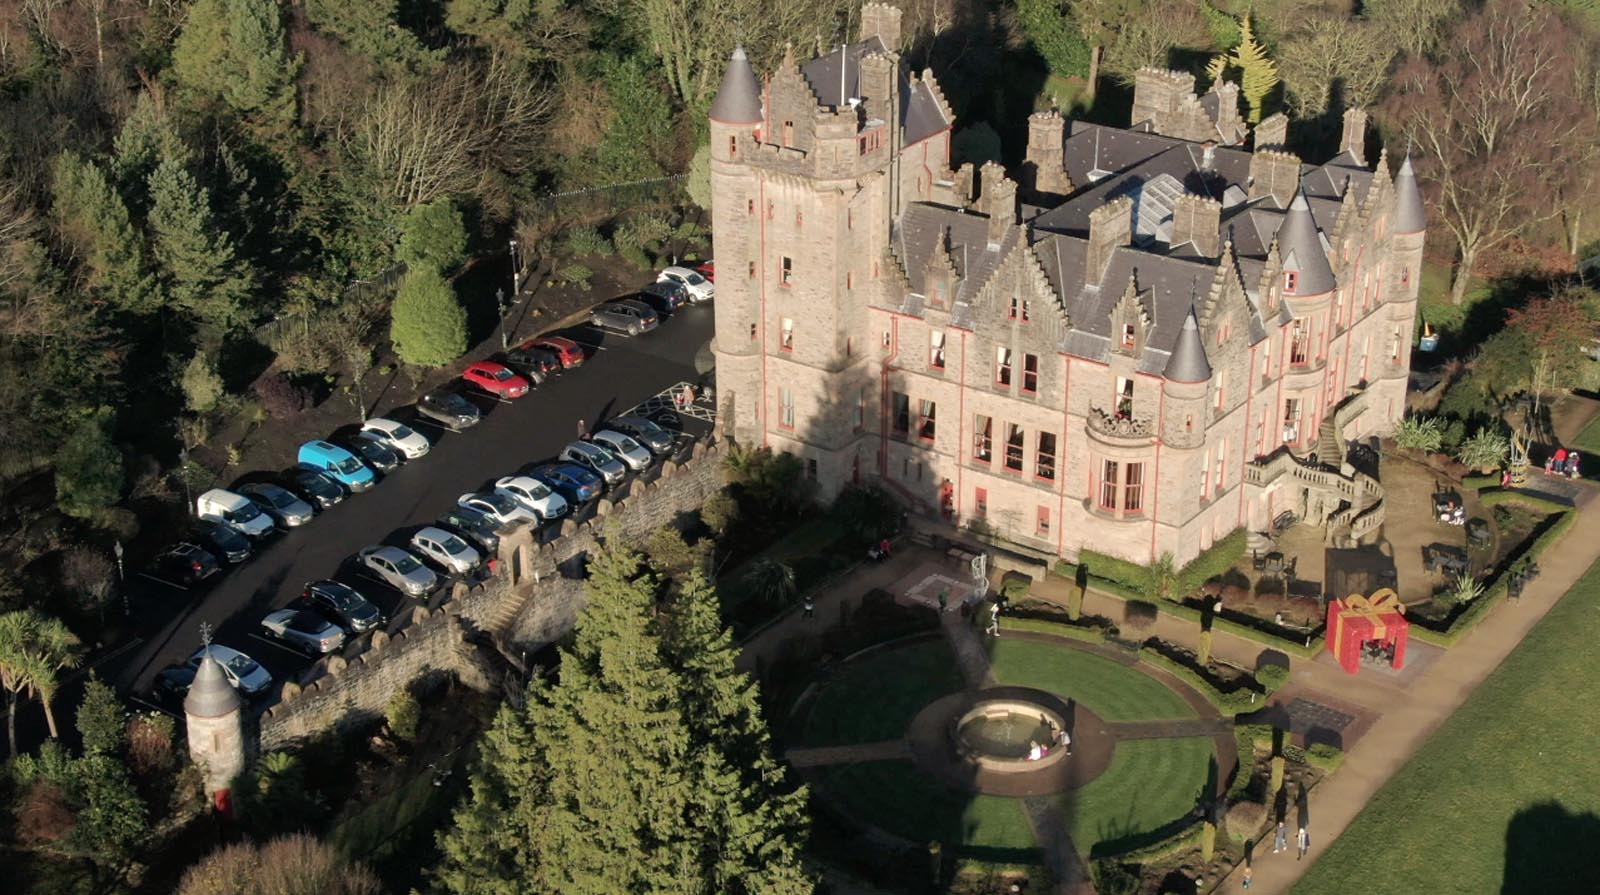 Aerial drone photography and video production services Dublin and Ireland portfolio - screenshot 2 of Belfast Castle 2 video